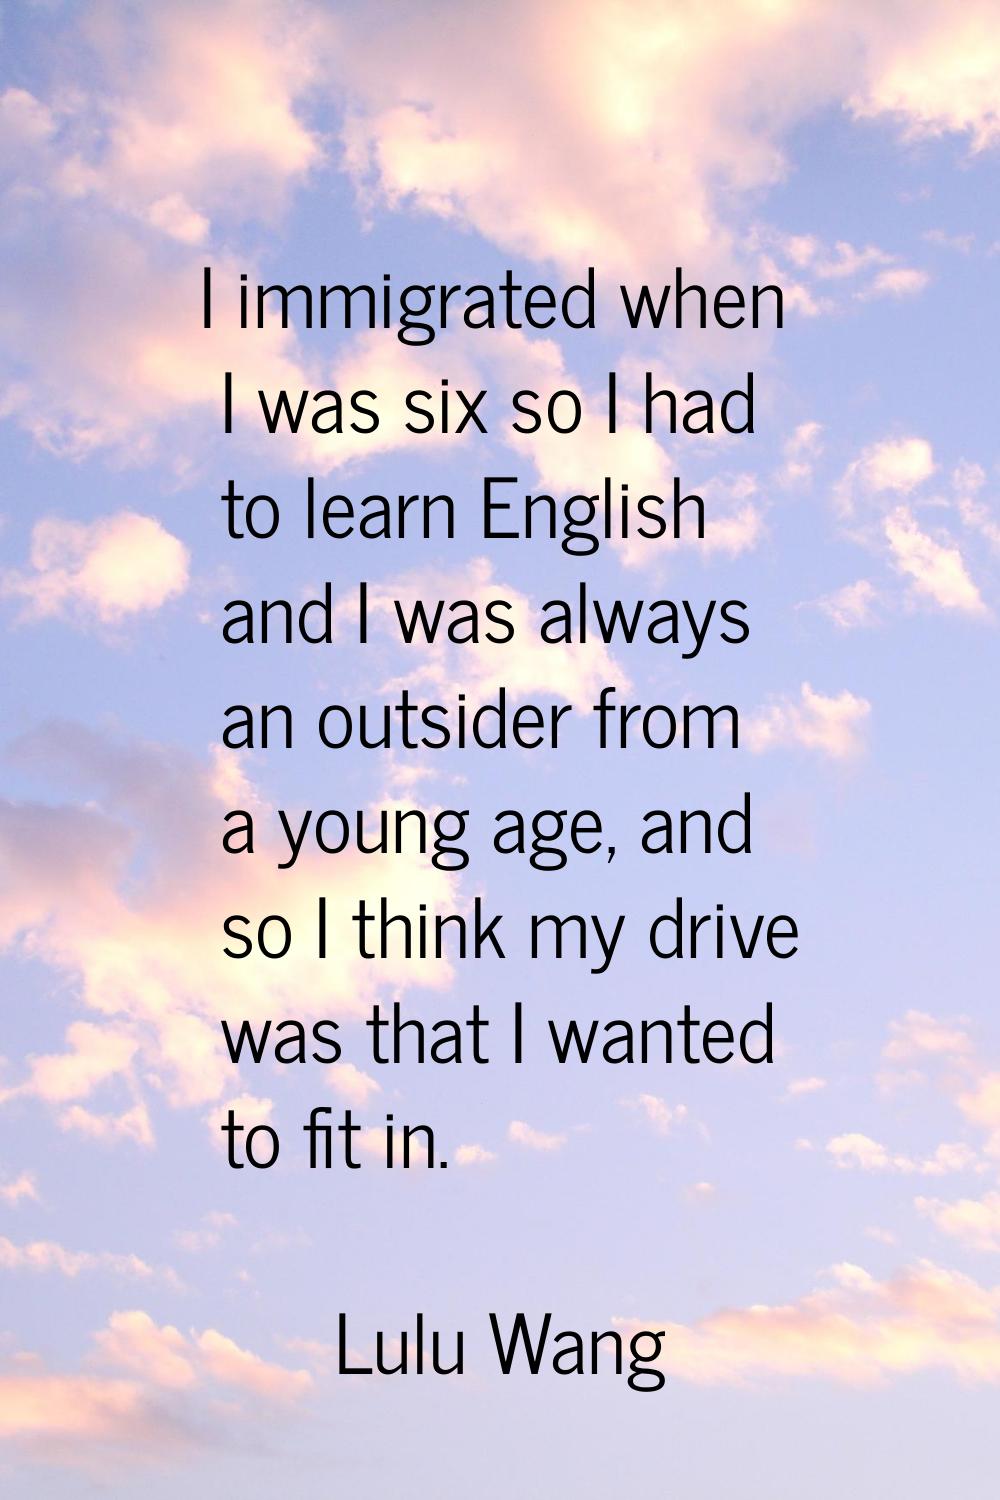 I immigrated when I was six so I had to learn English and I was always an outsider from a young age